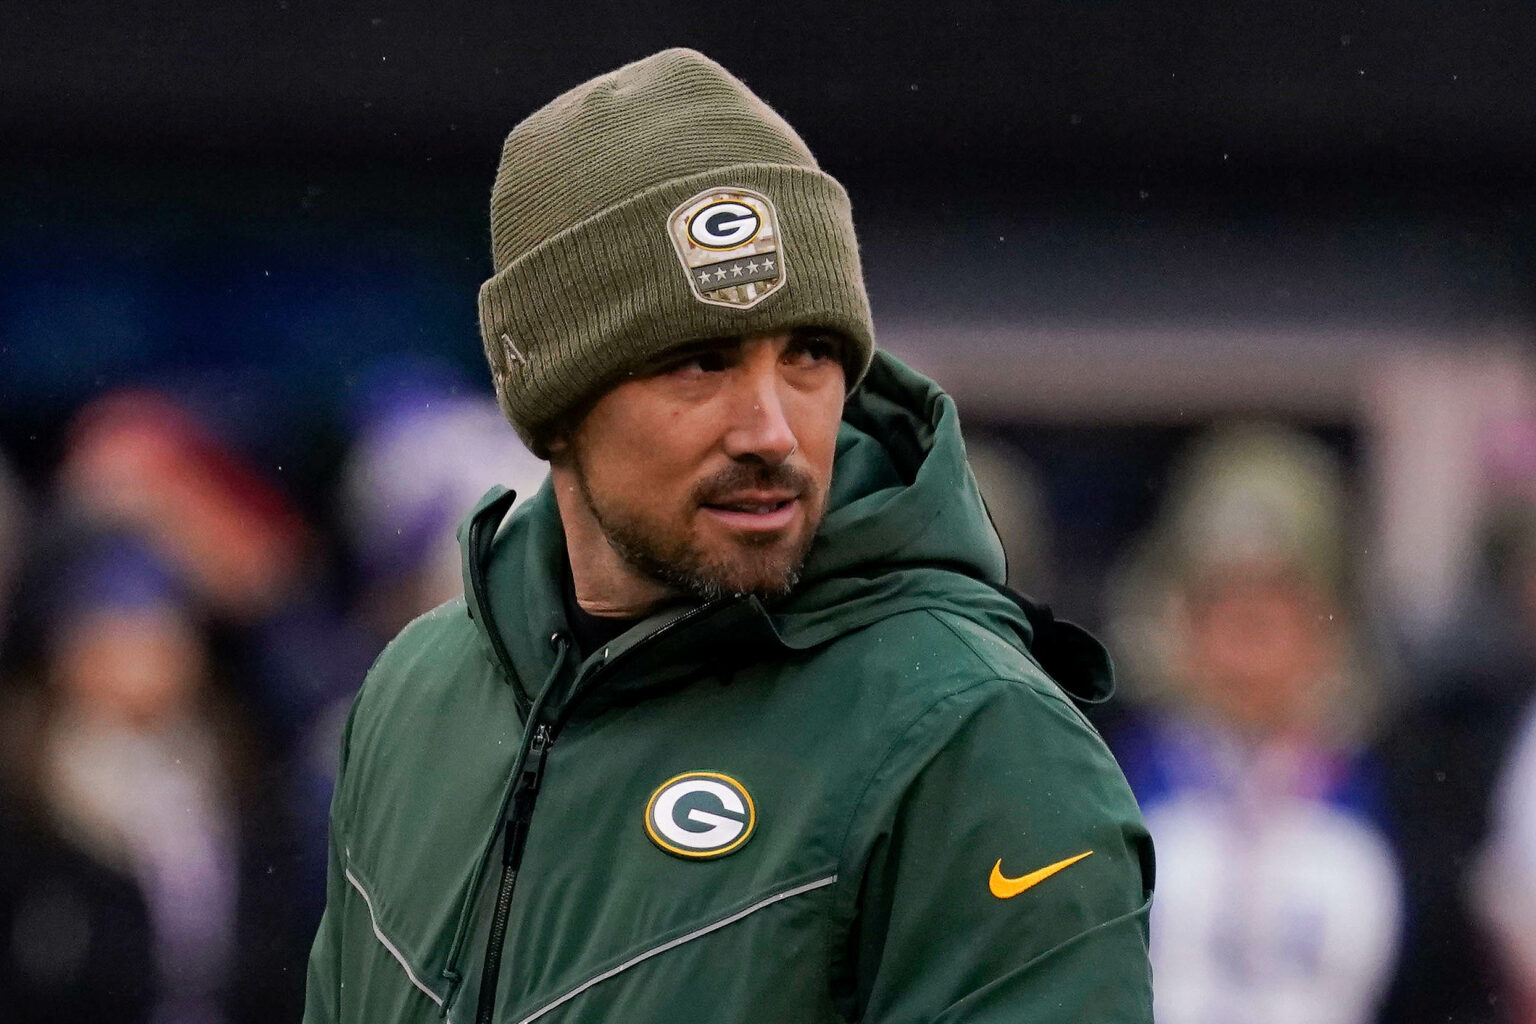 Dec 1, 2019; East Rutherford, NJ, USA; Green Bay Packers head coach Matt LaFleur looks on during warm-ups before the game against the Giants at MetLife Stadium. Mandatory Credit: Robert Deutsch-USA TODAY Sports Dontayvion Wicks